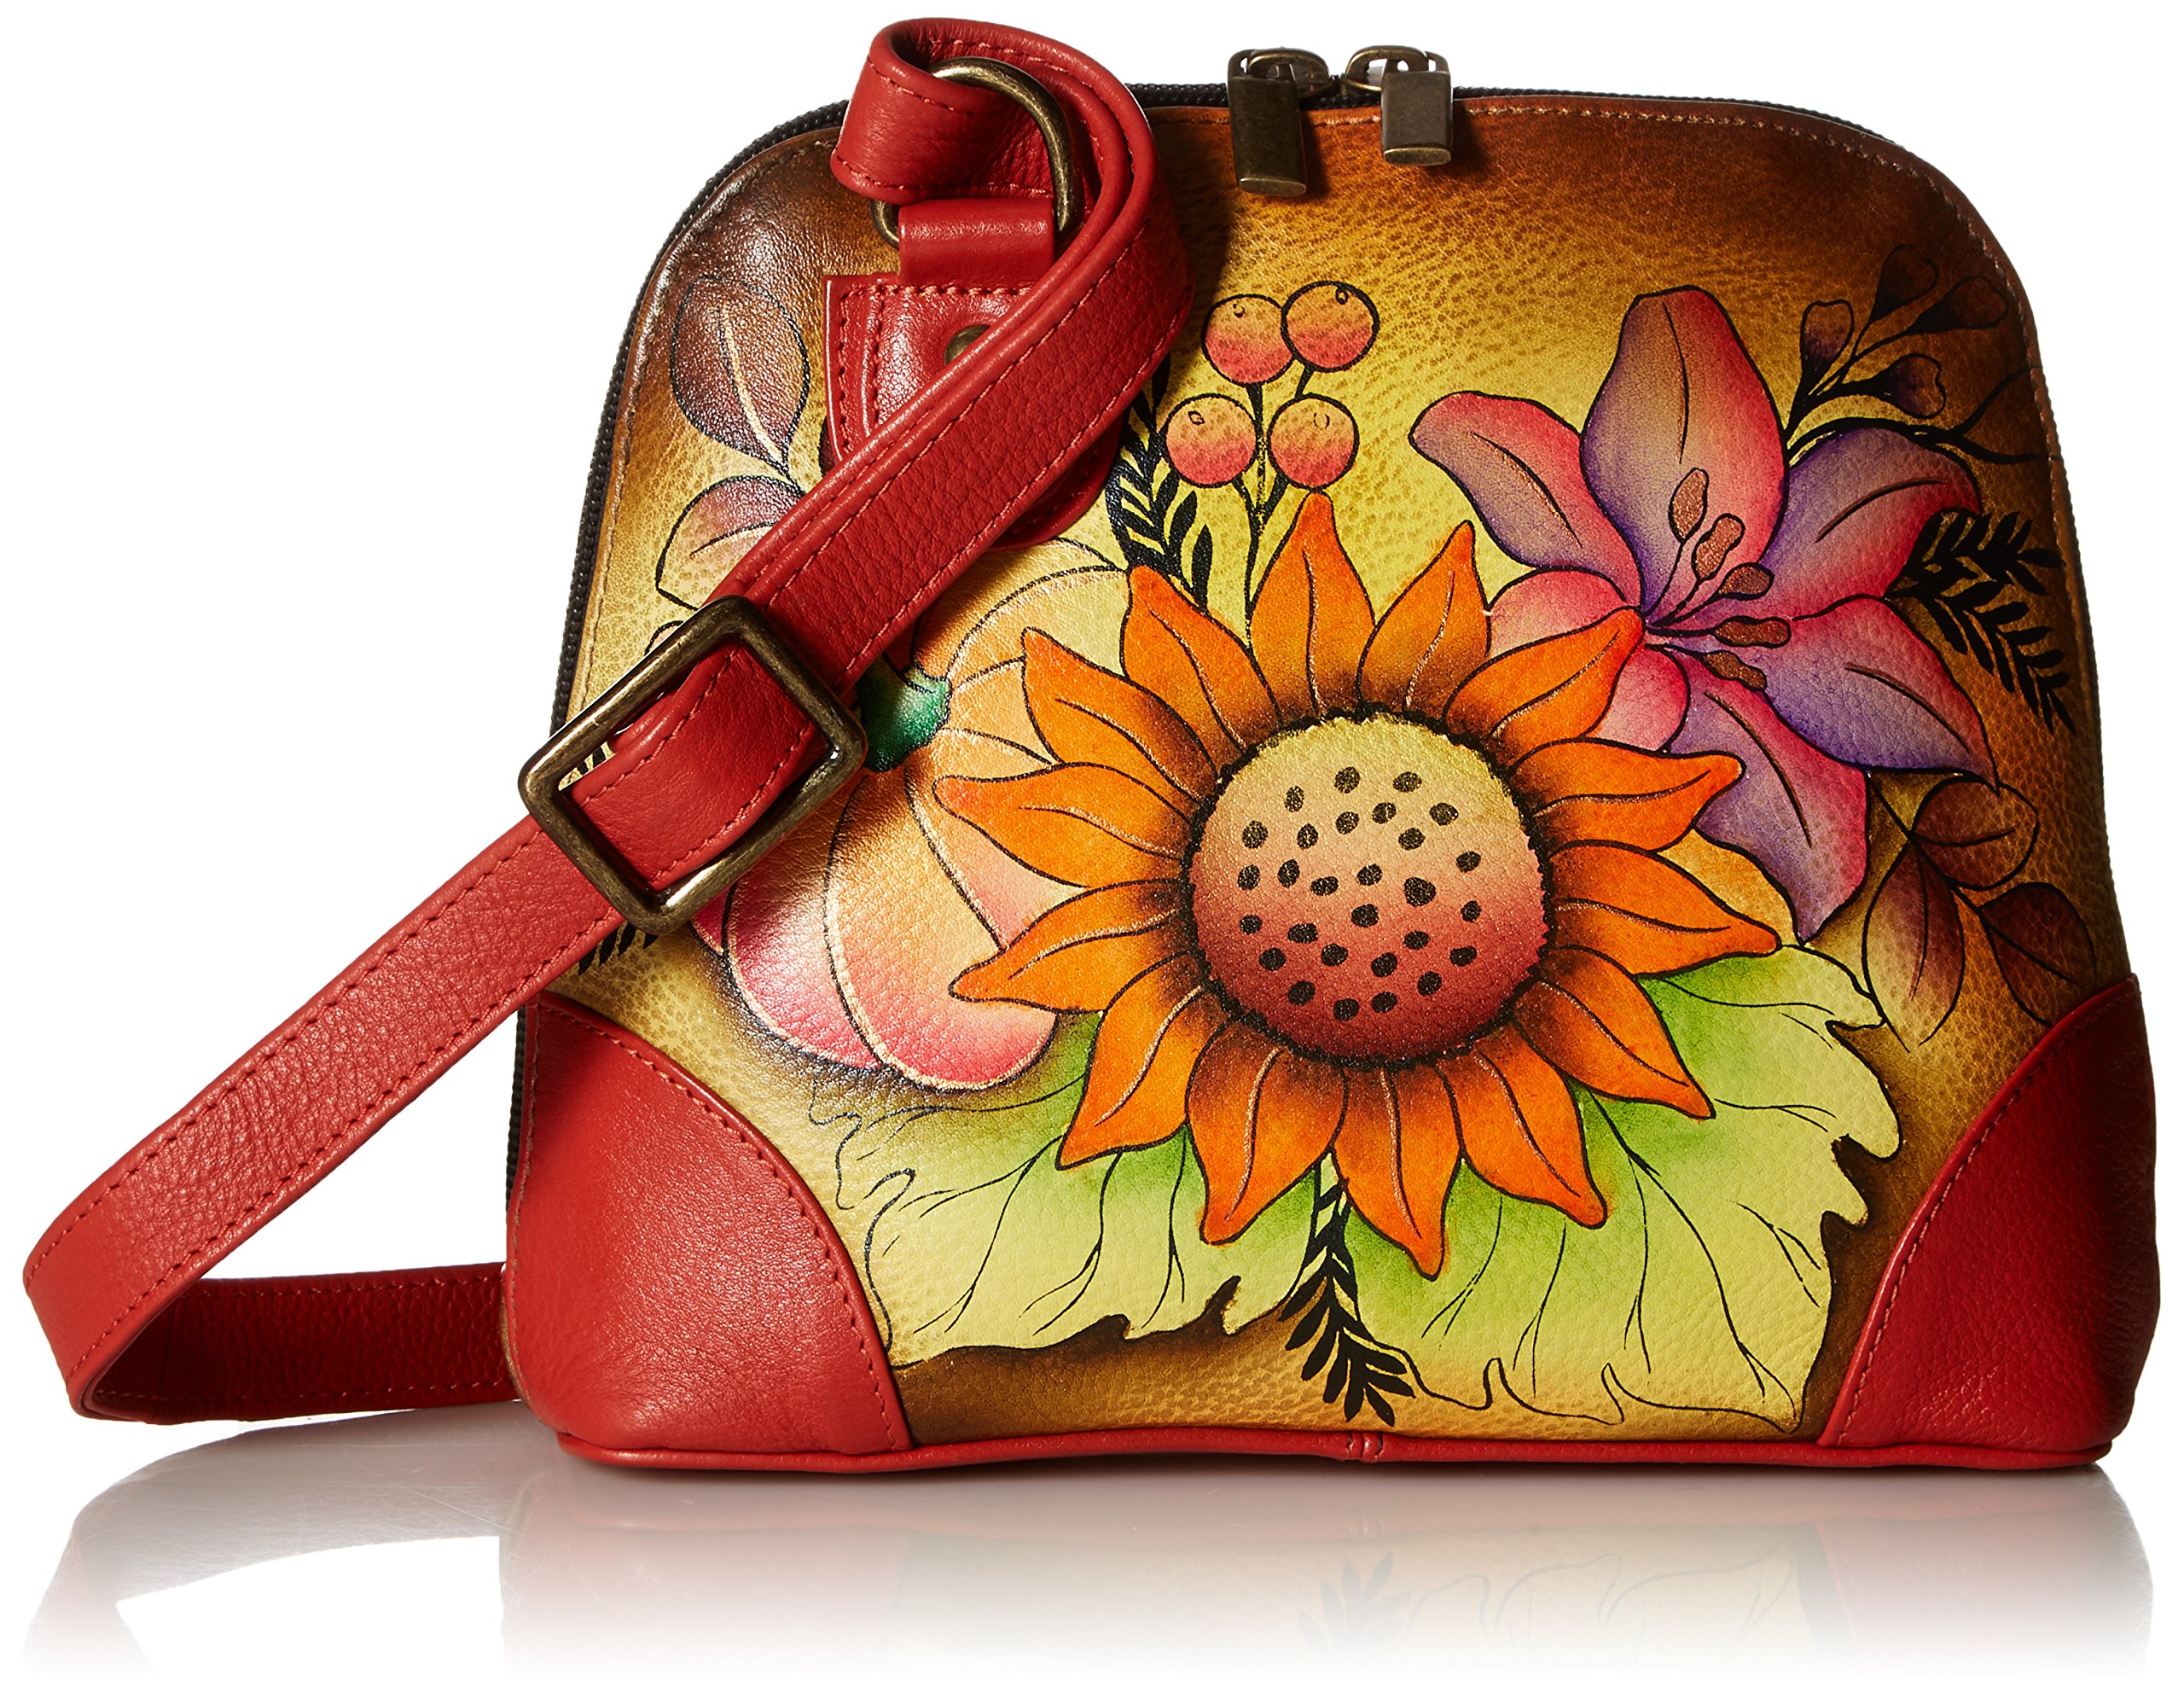 Anna by Anuschka Women's Hand Painted Leather Small Multi Compartment Zip-Around Organizer, Fall Bouquet